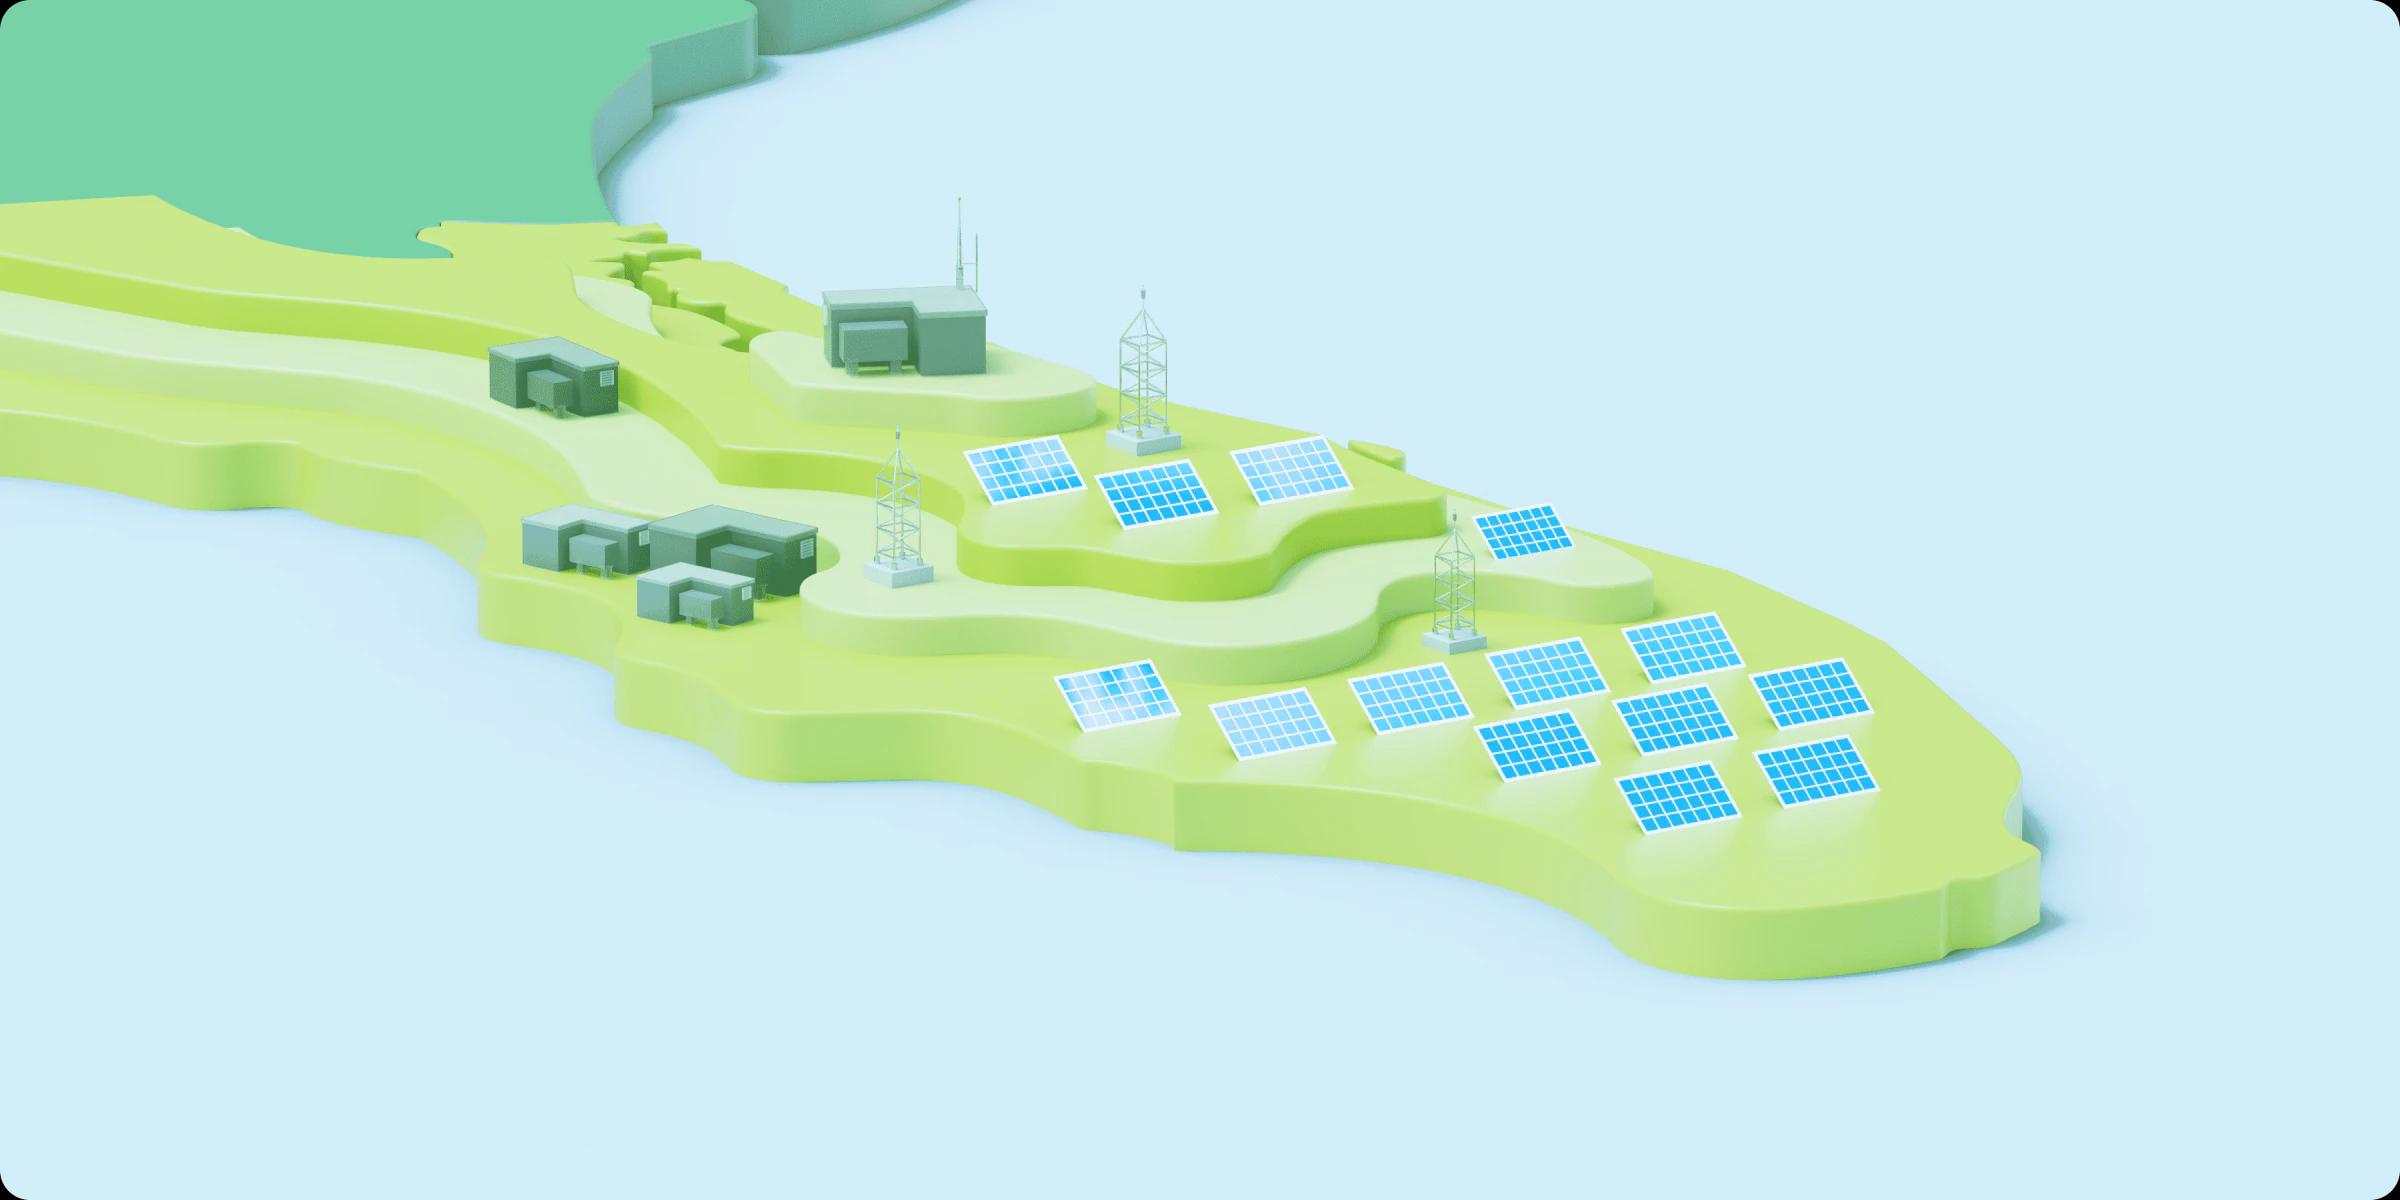 A green 3D model of the Florida peninsula with accurate topography with solar panels and solar power storage facilities strewn across it